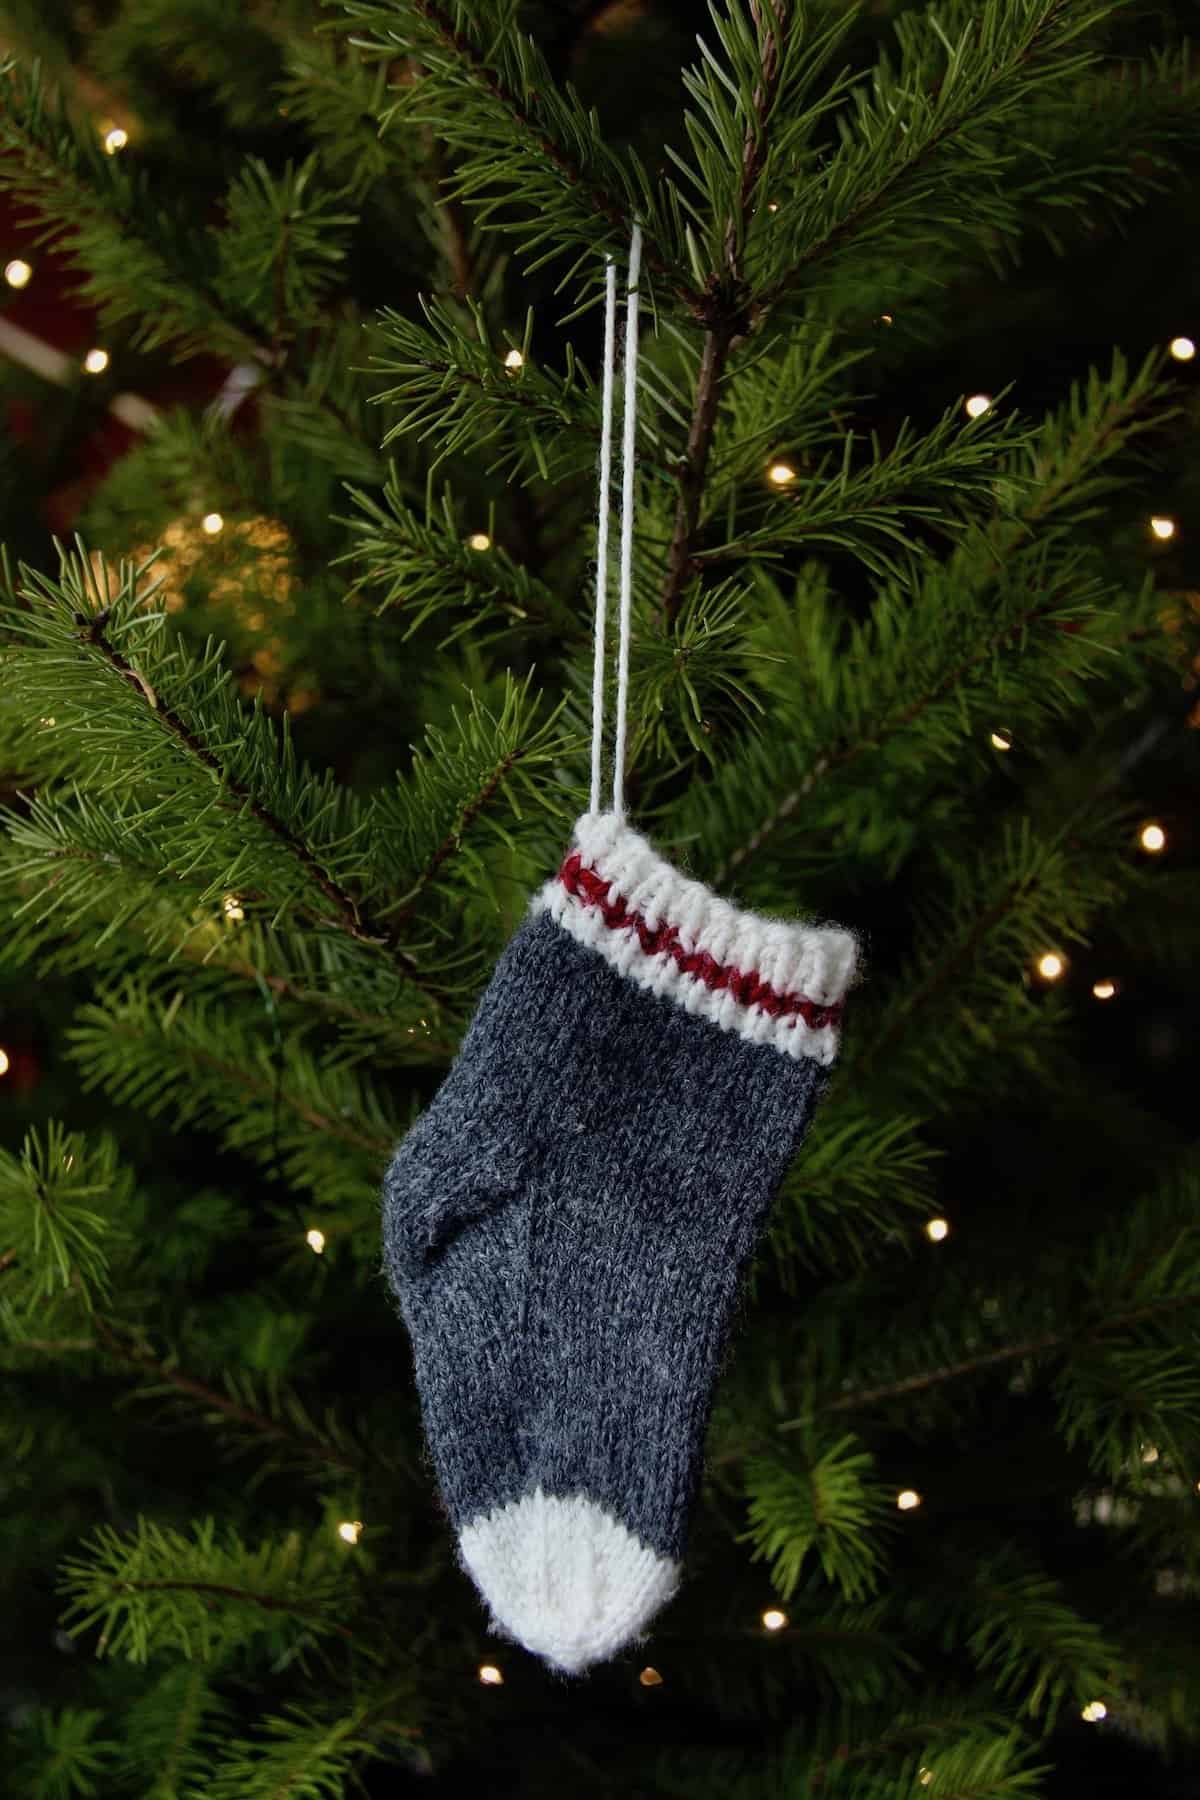 Little lumberjack sock stocking ornaments to celebrate baby's first christmas #babysfirstchristmas #babystocking #babychristmas #stockingornament